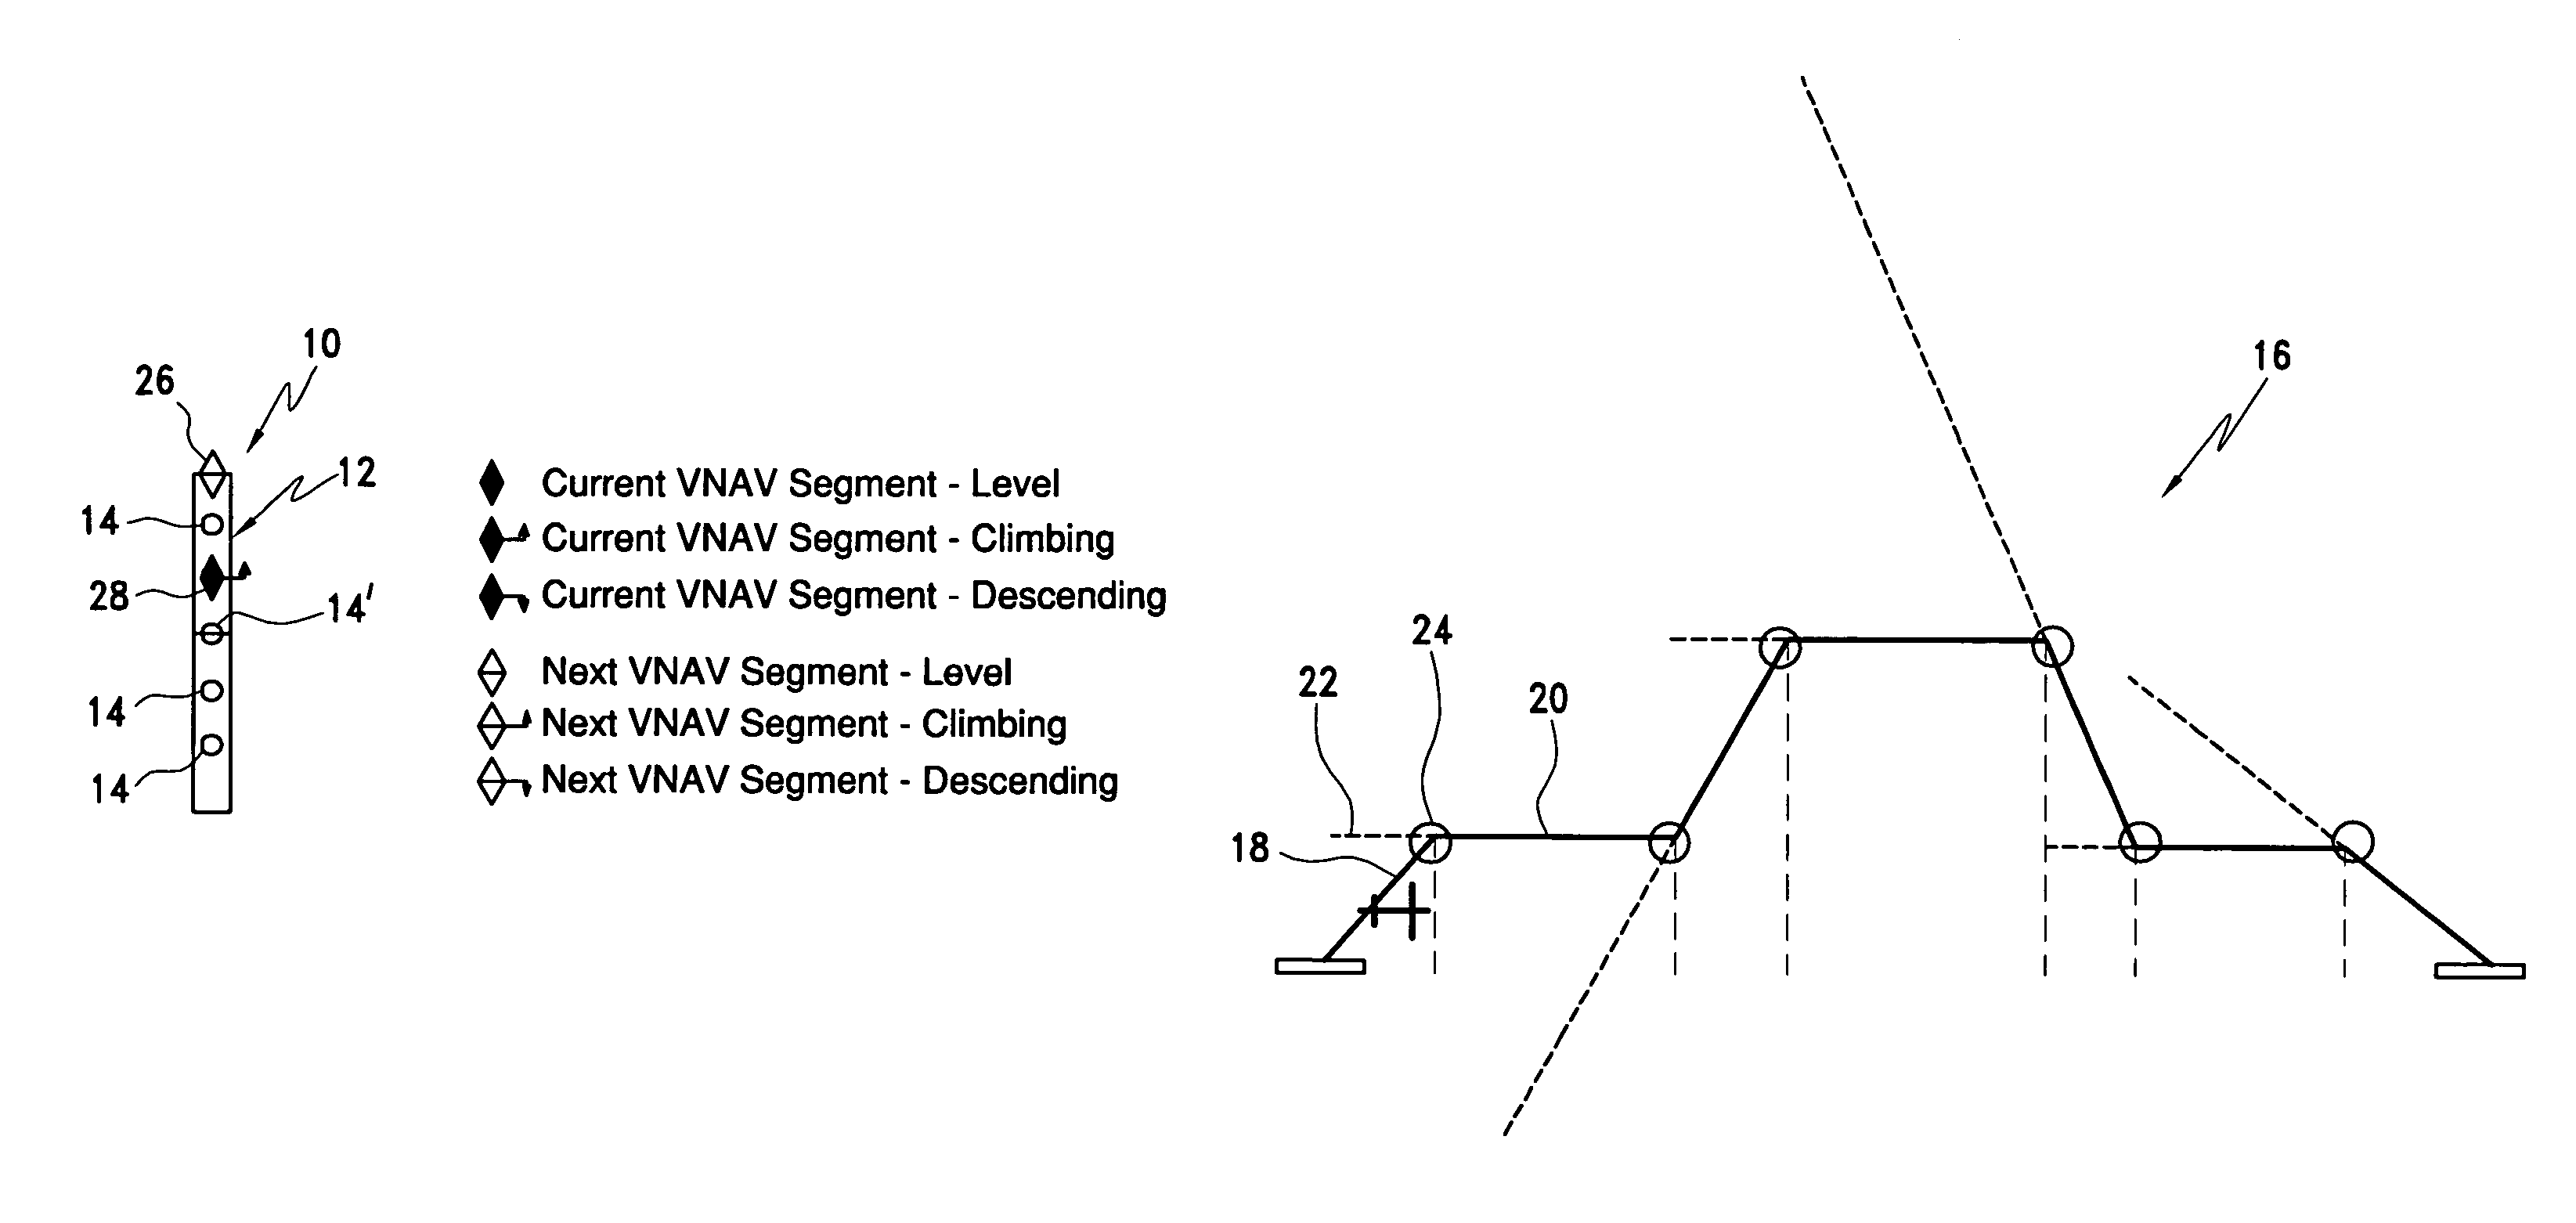 Vertical deviation indication and prediction system